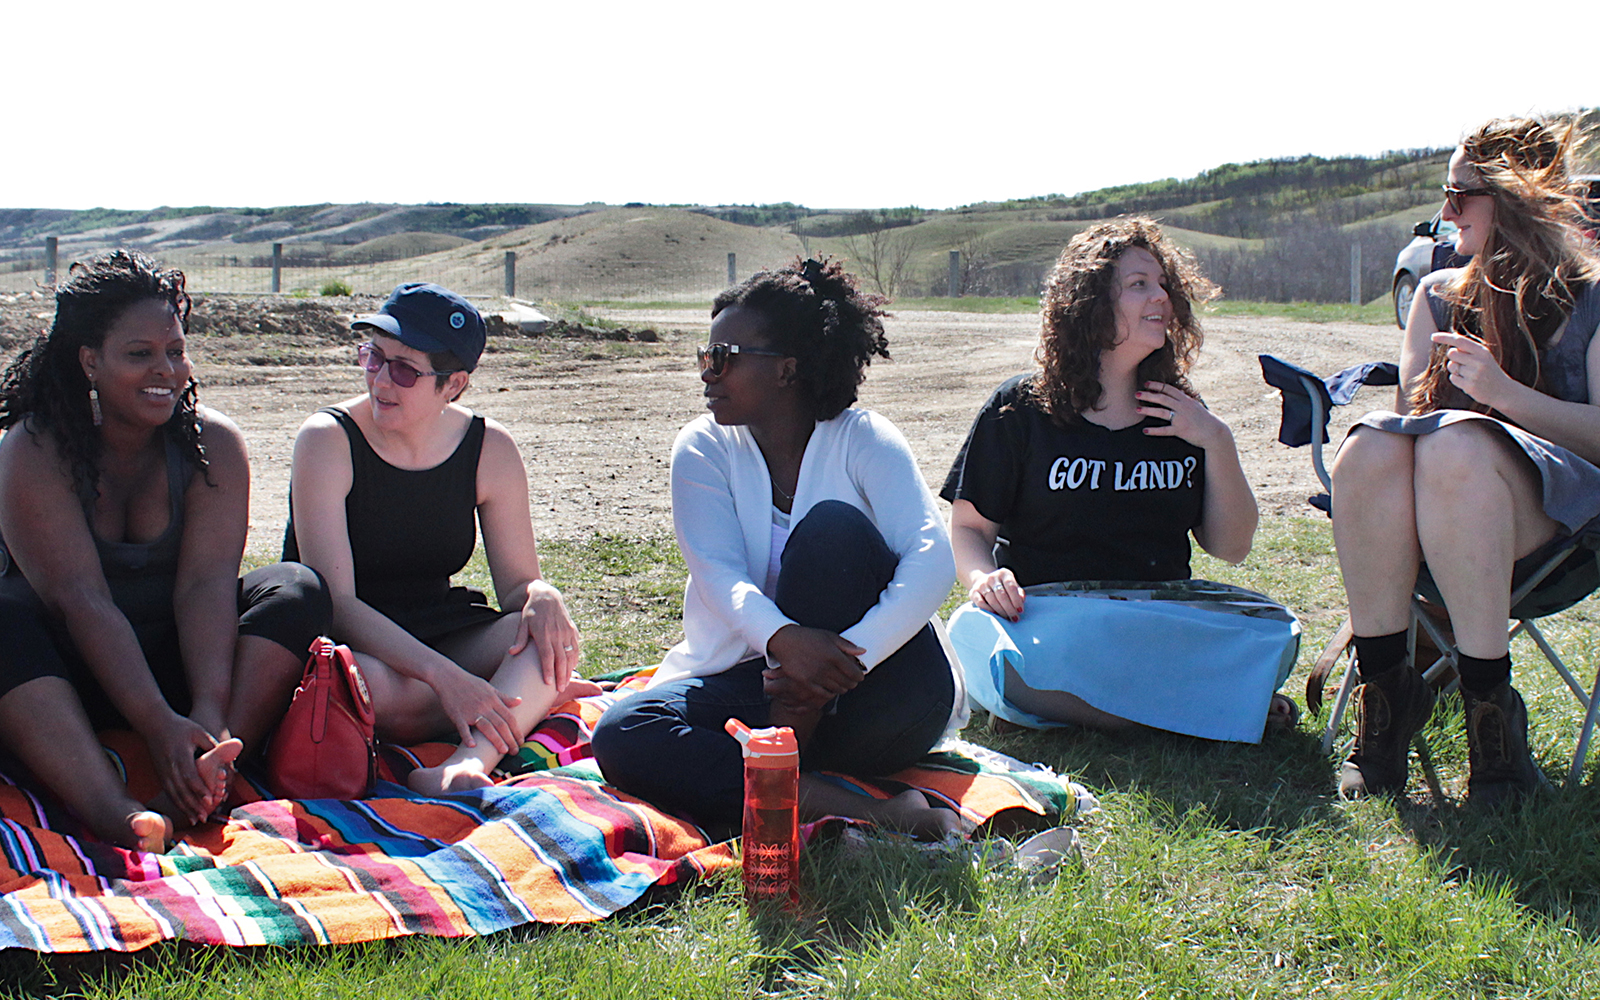 Five women are sitting outside with rolling green hills and sky behind them. Three of the women sit on a blanket on the left of the image, leaning towards each other in conversation. Two more women on the right - one seated in a folding chair, the other on the ground - are also talking while the wind blows their hair.